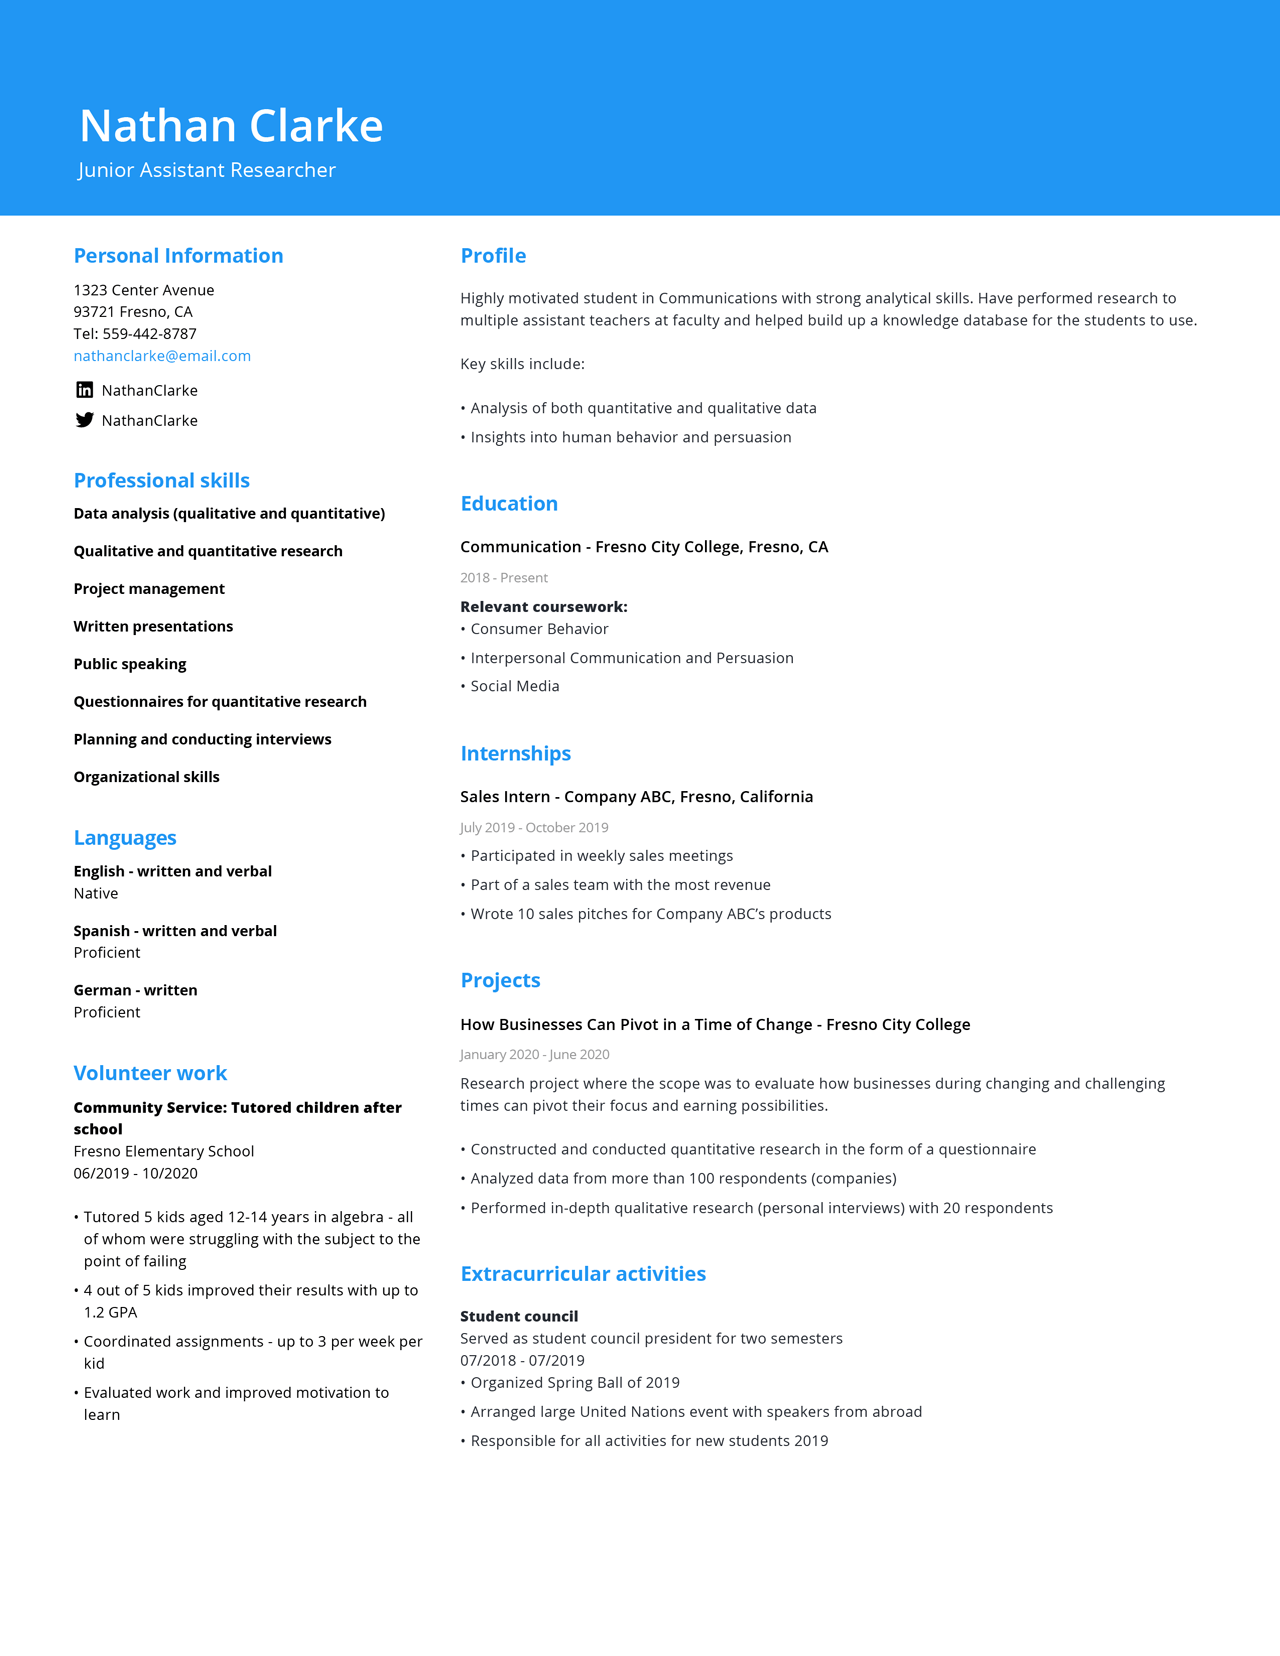 The Best CV Format For Freshers [examples] - Jofibo